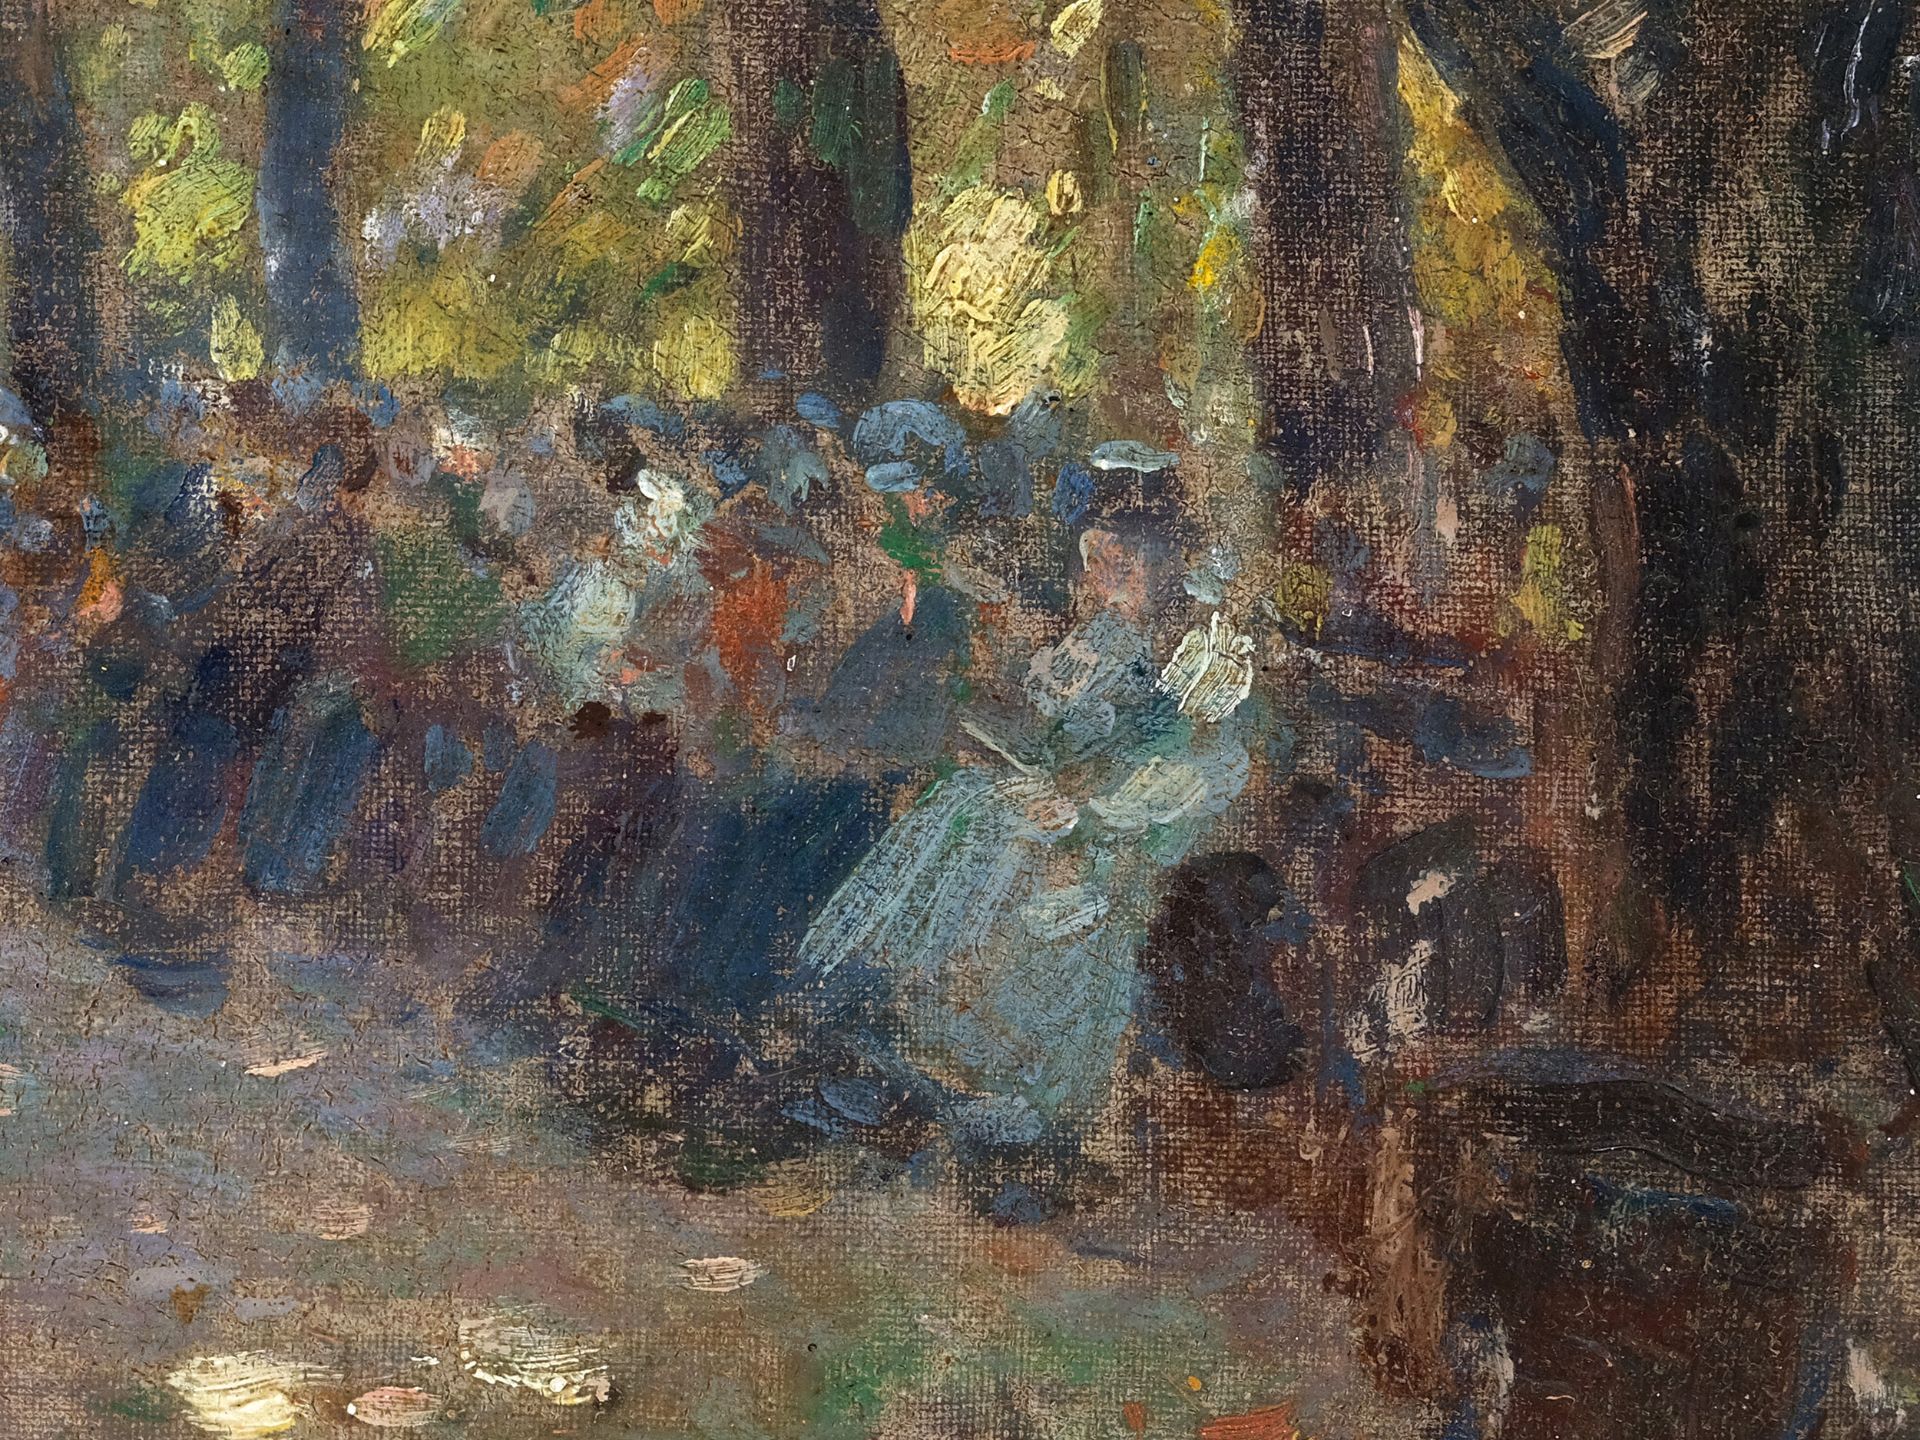 Berlin painter, around 1900, circle of Max Liebermann, In the Park - Image 2 of 3